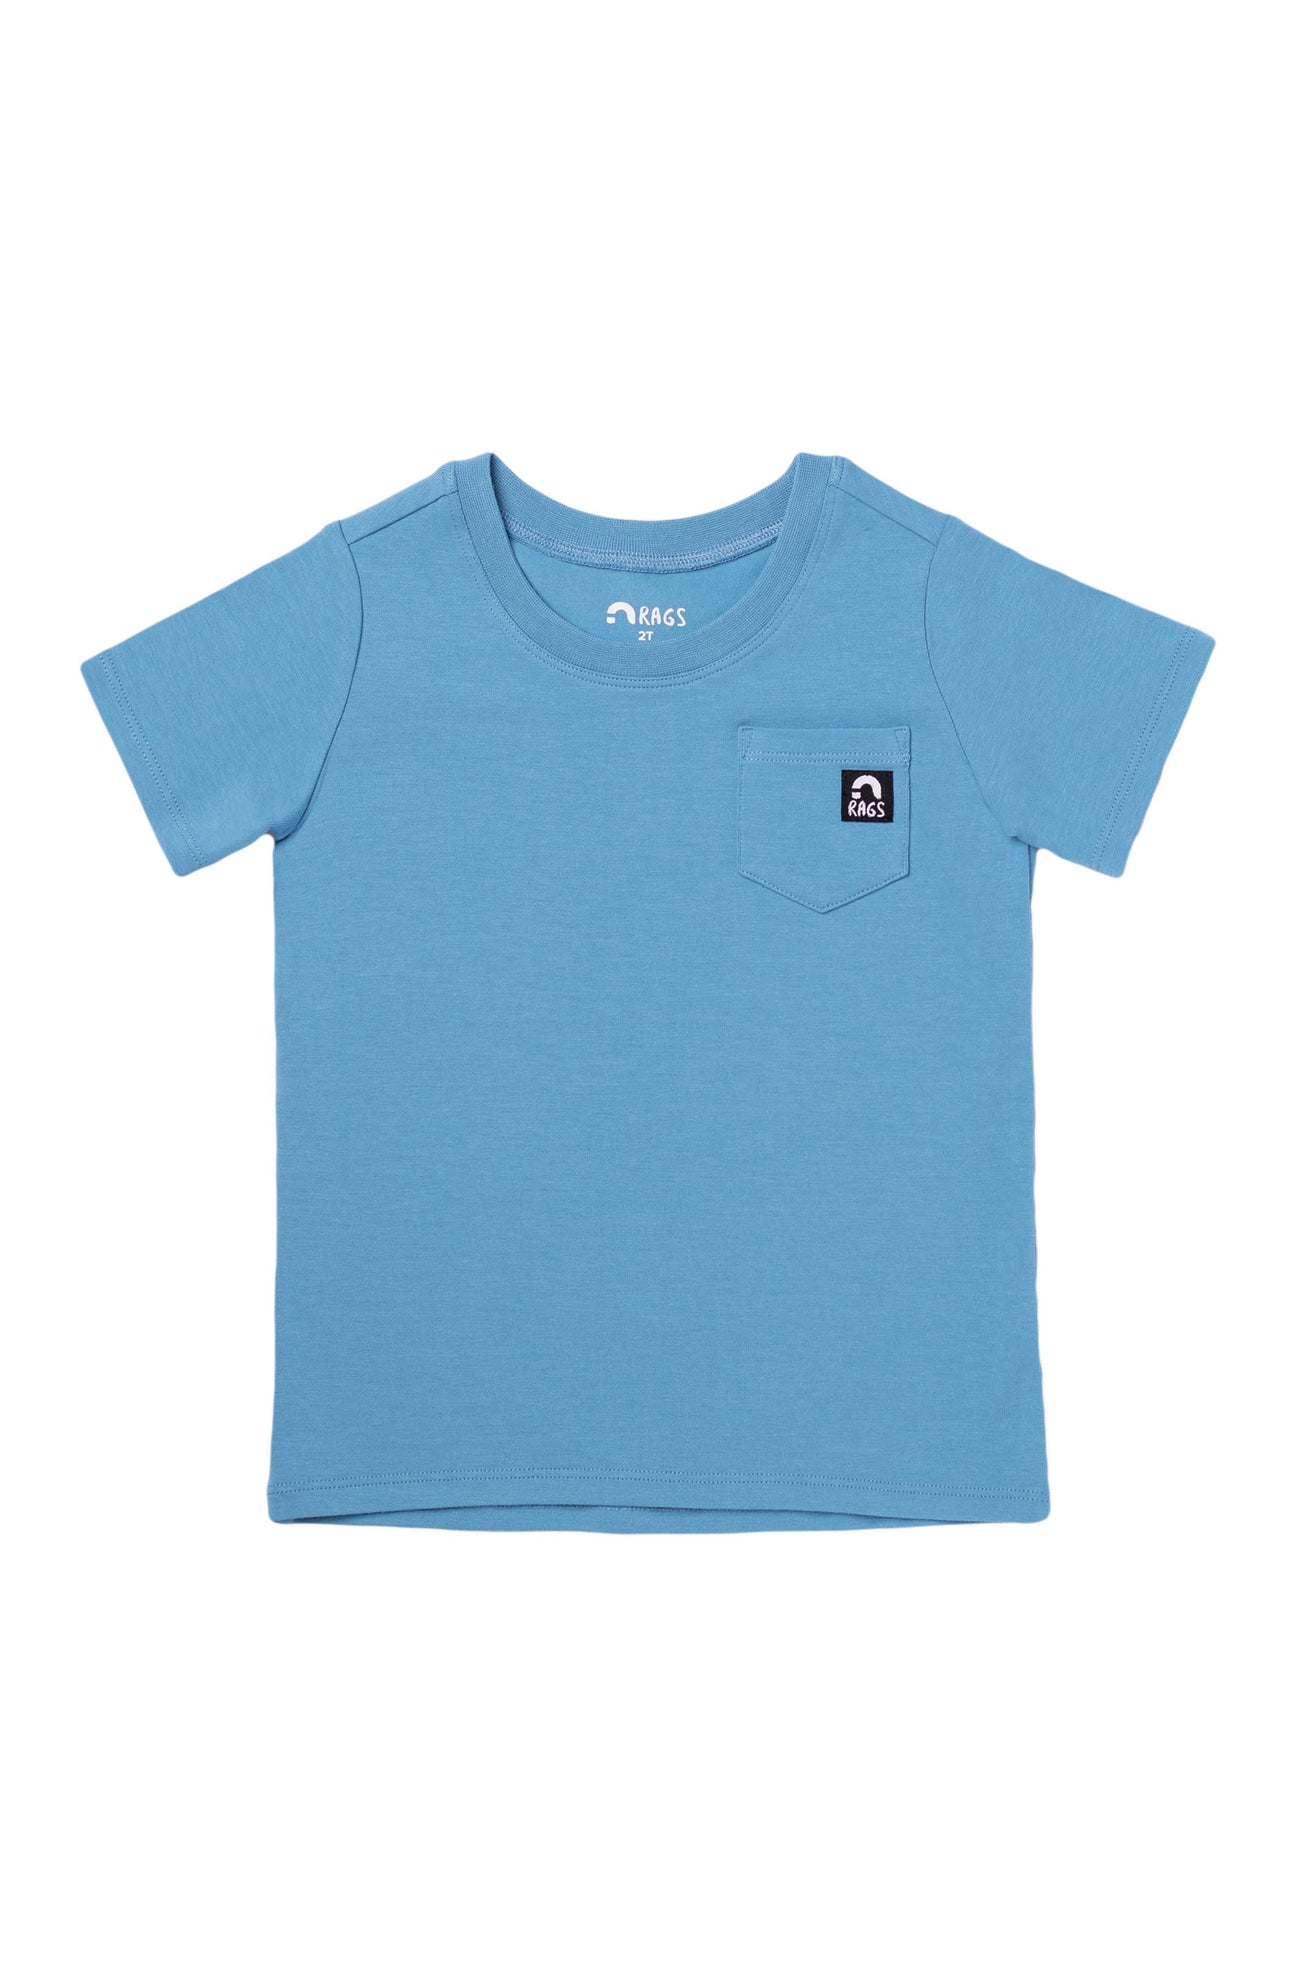 Essentials Short Sleeve Chest Pocket Rounded Tee - 'Parsian Blue' TheT43Shop